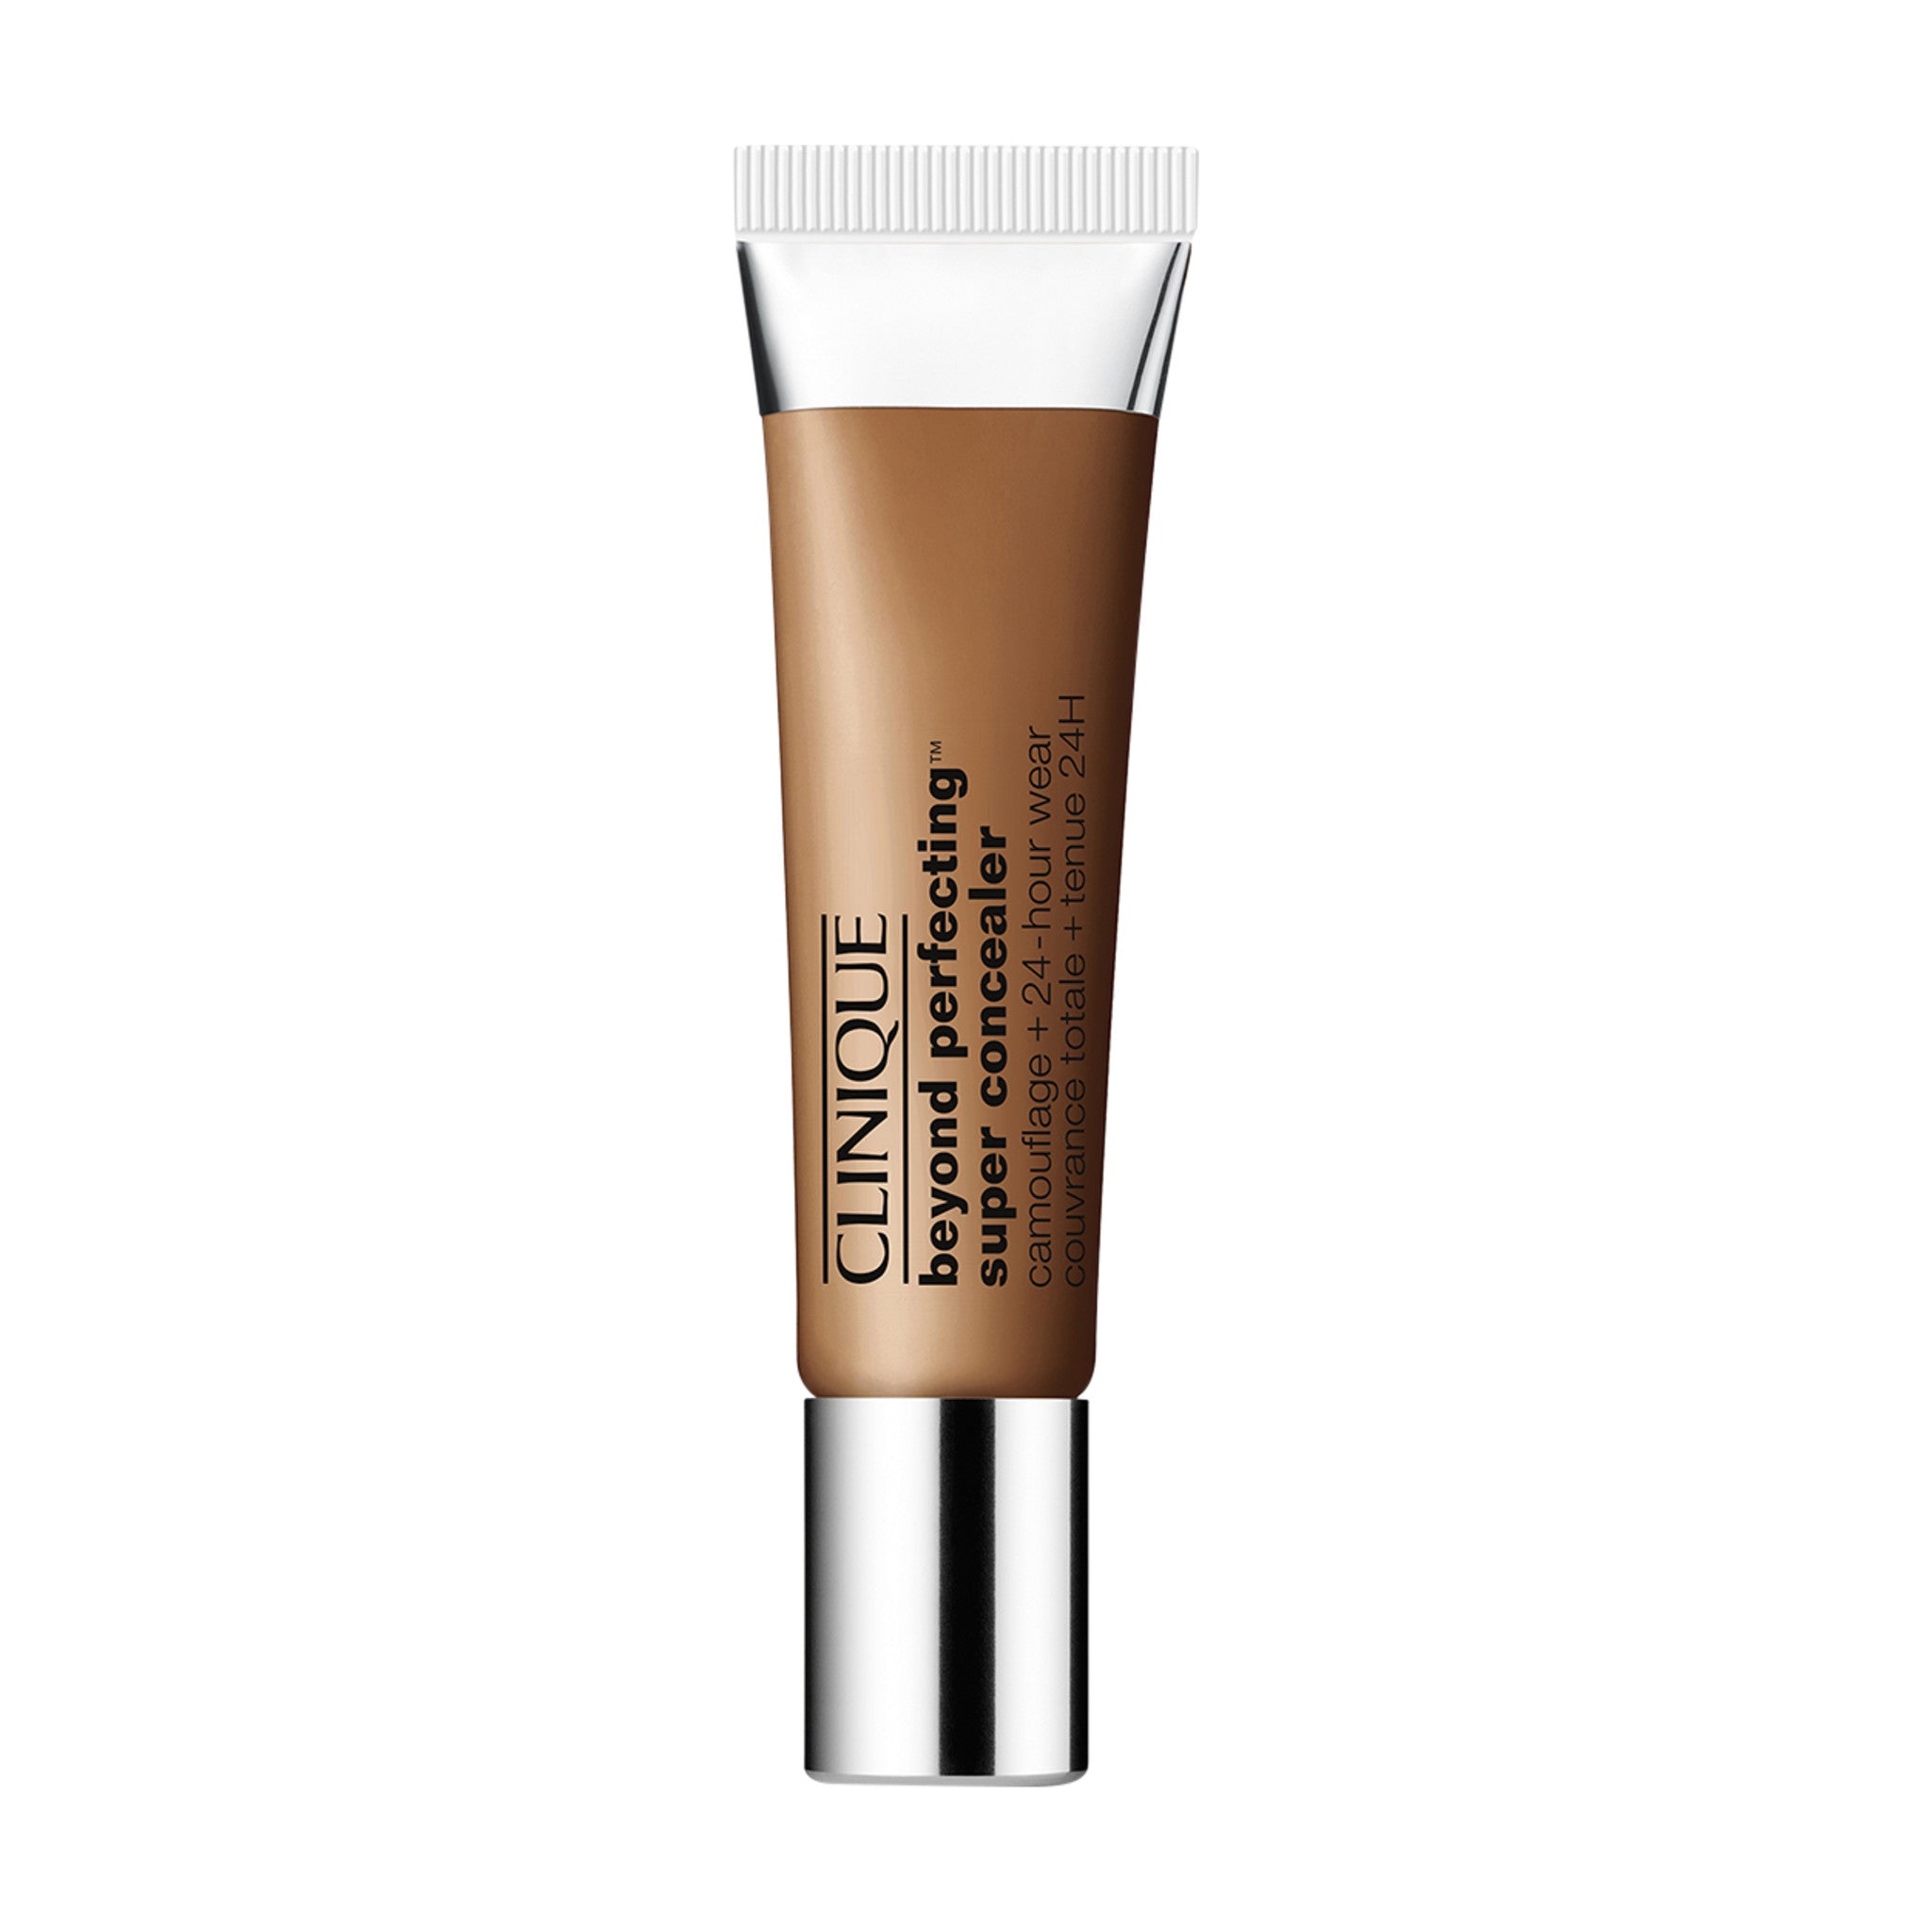 Clinique Beyond Perfecting Super Concealer Camouflage 24-Hour Wear Color/Shade variant: Deep 28 main image. This product is for deep complexions